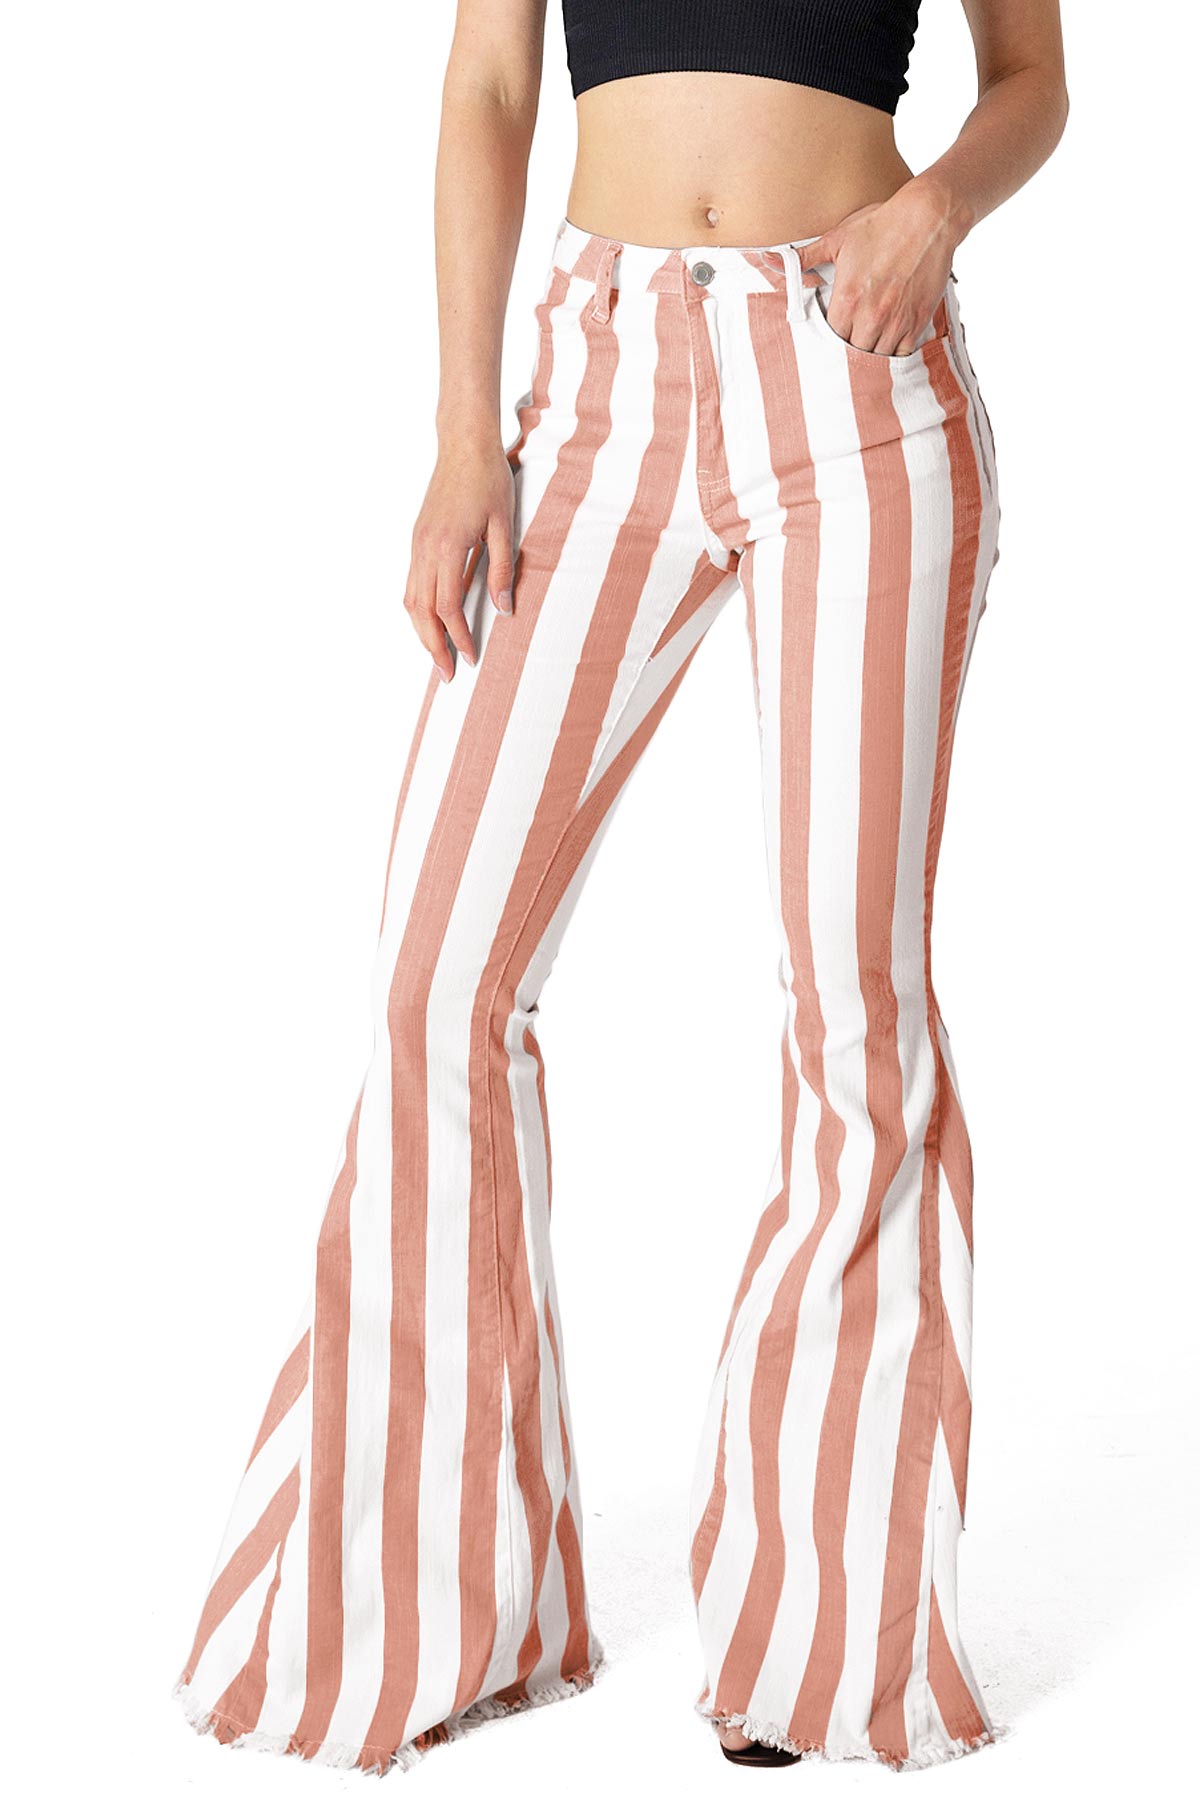 Amplified Stripe Flares